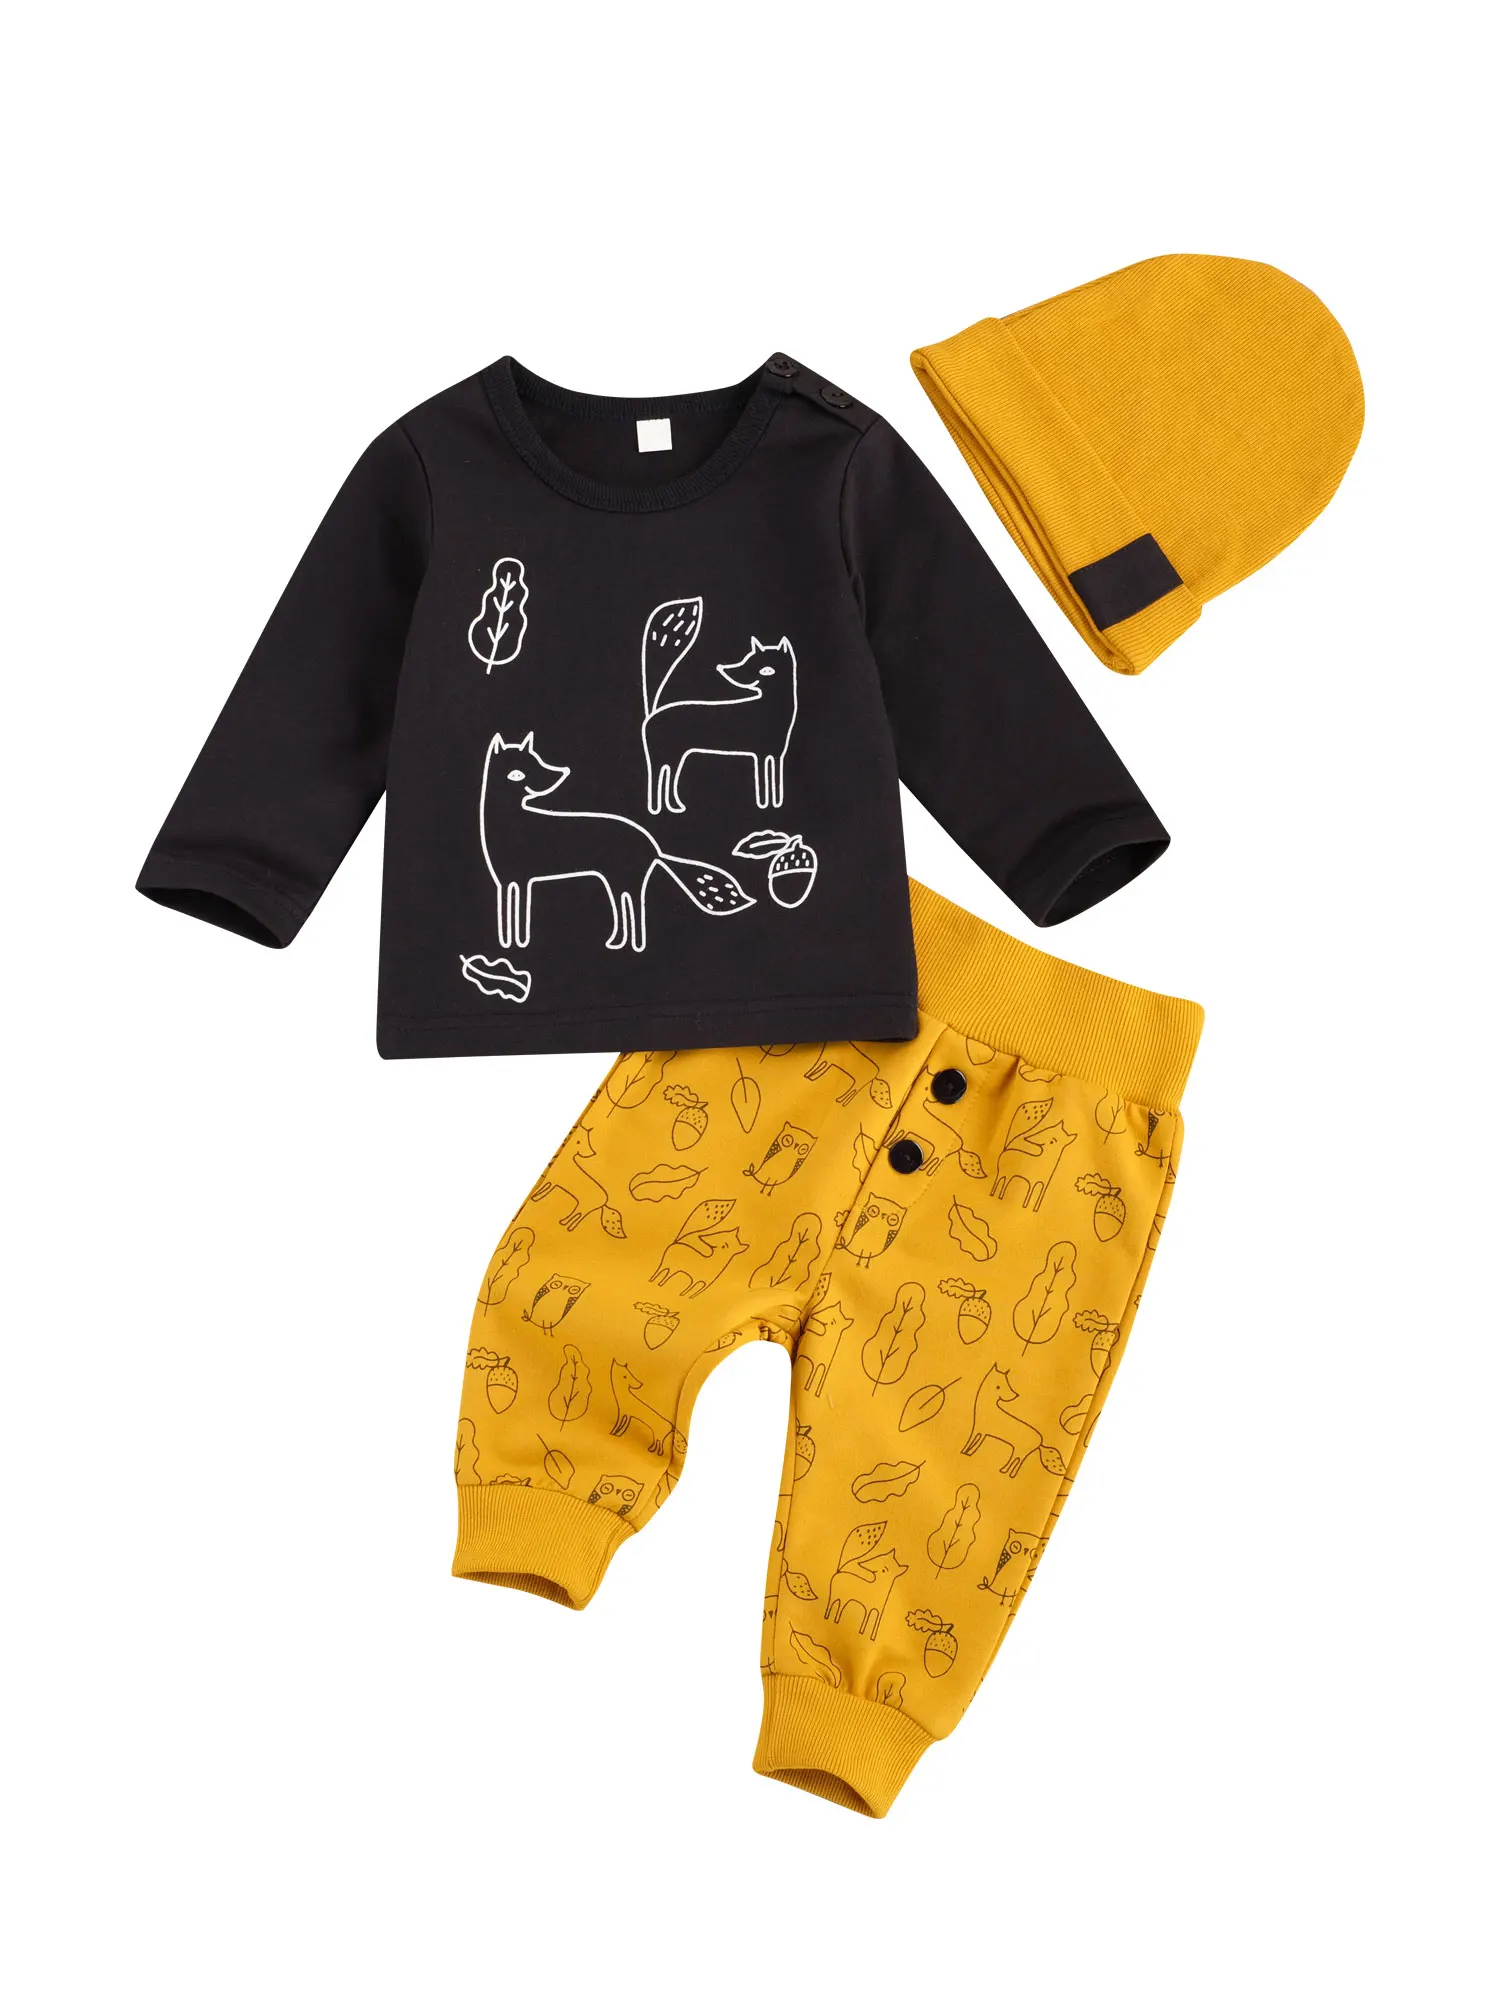 Children Long Sleeves Trouser Suit, Toddler Baby Girl Boys Fox Printed Clothes Set, Round Collar Outfits with Hat 3Pcs Outfit